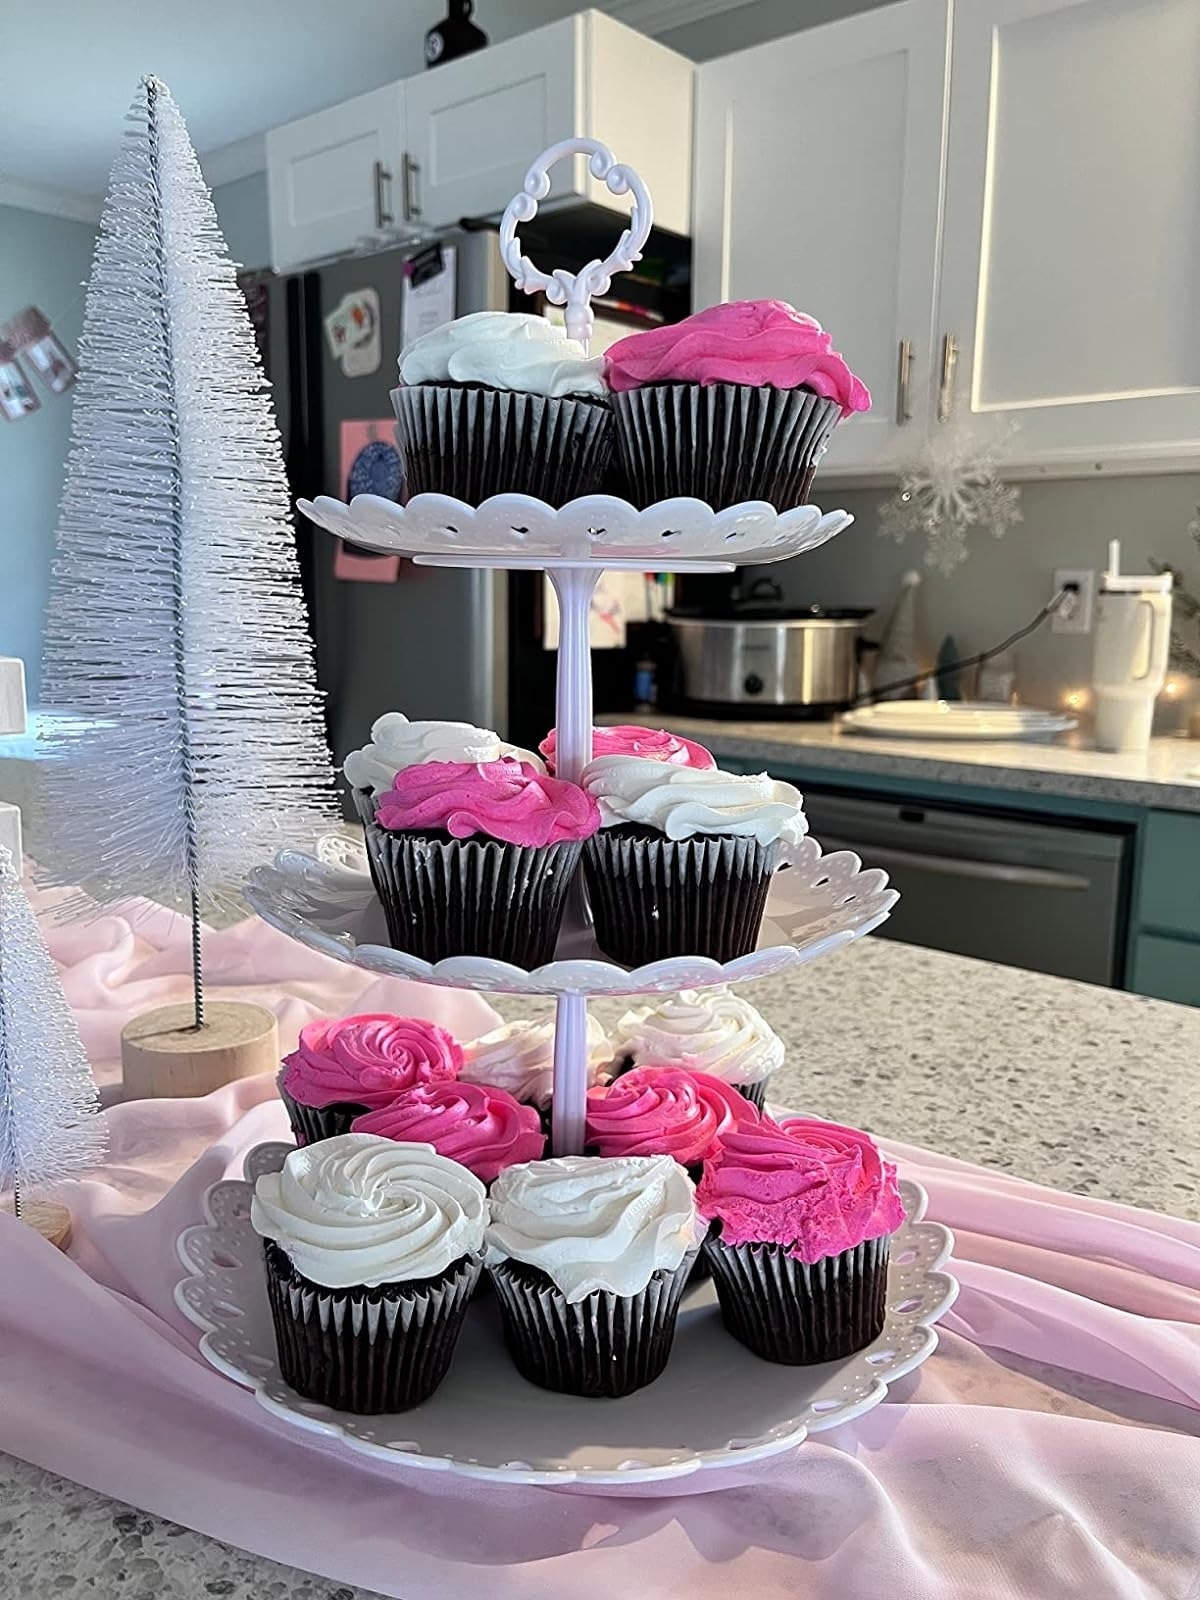 white three-tier cupcake stand with pink and white frosted chocolate cupcakes